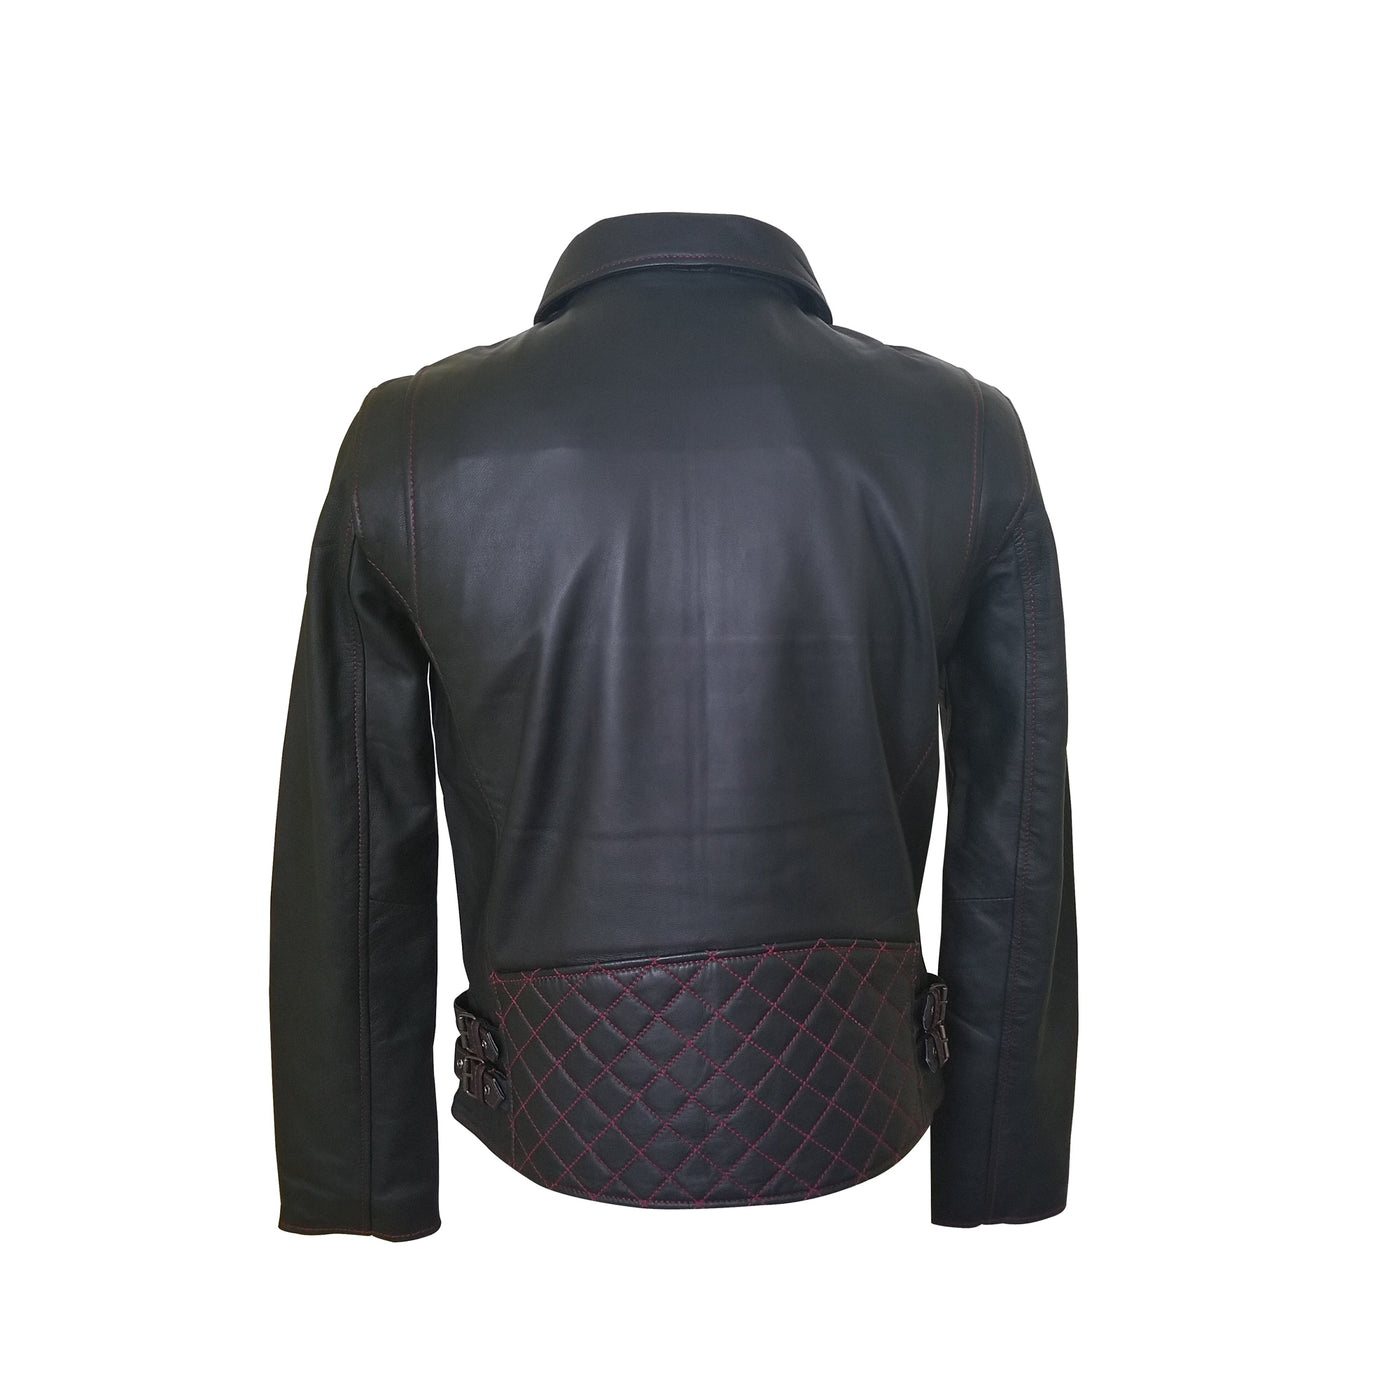 Soft and Comfortable Bonnie's black leather jacket 